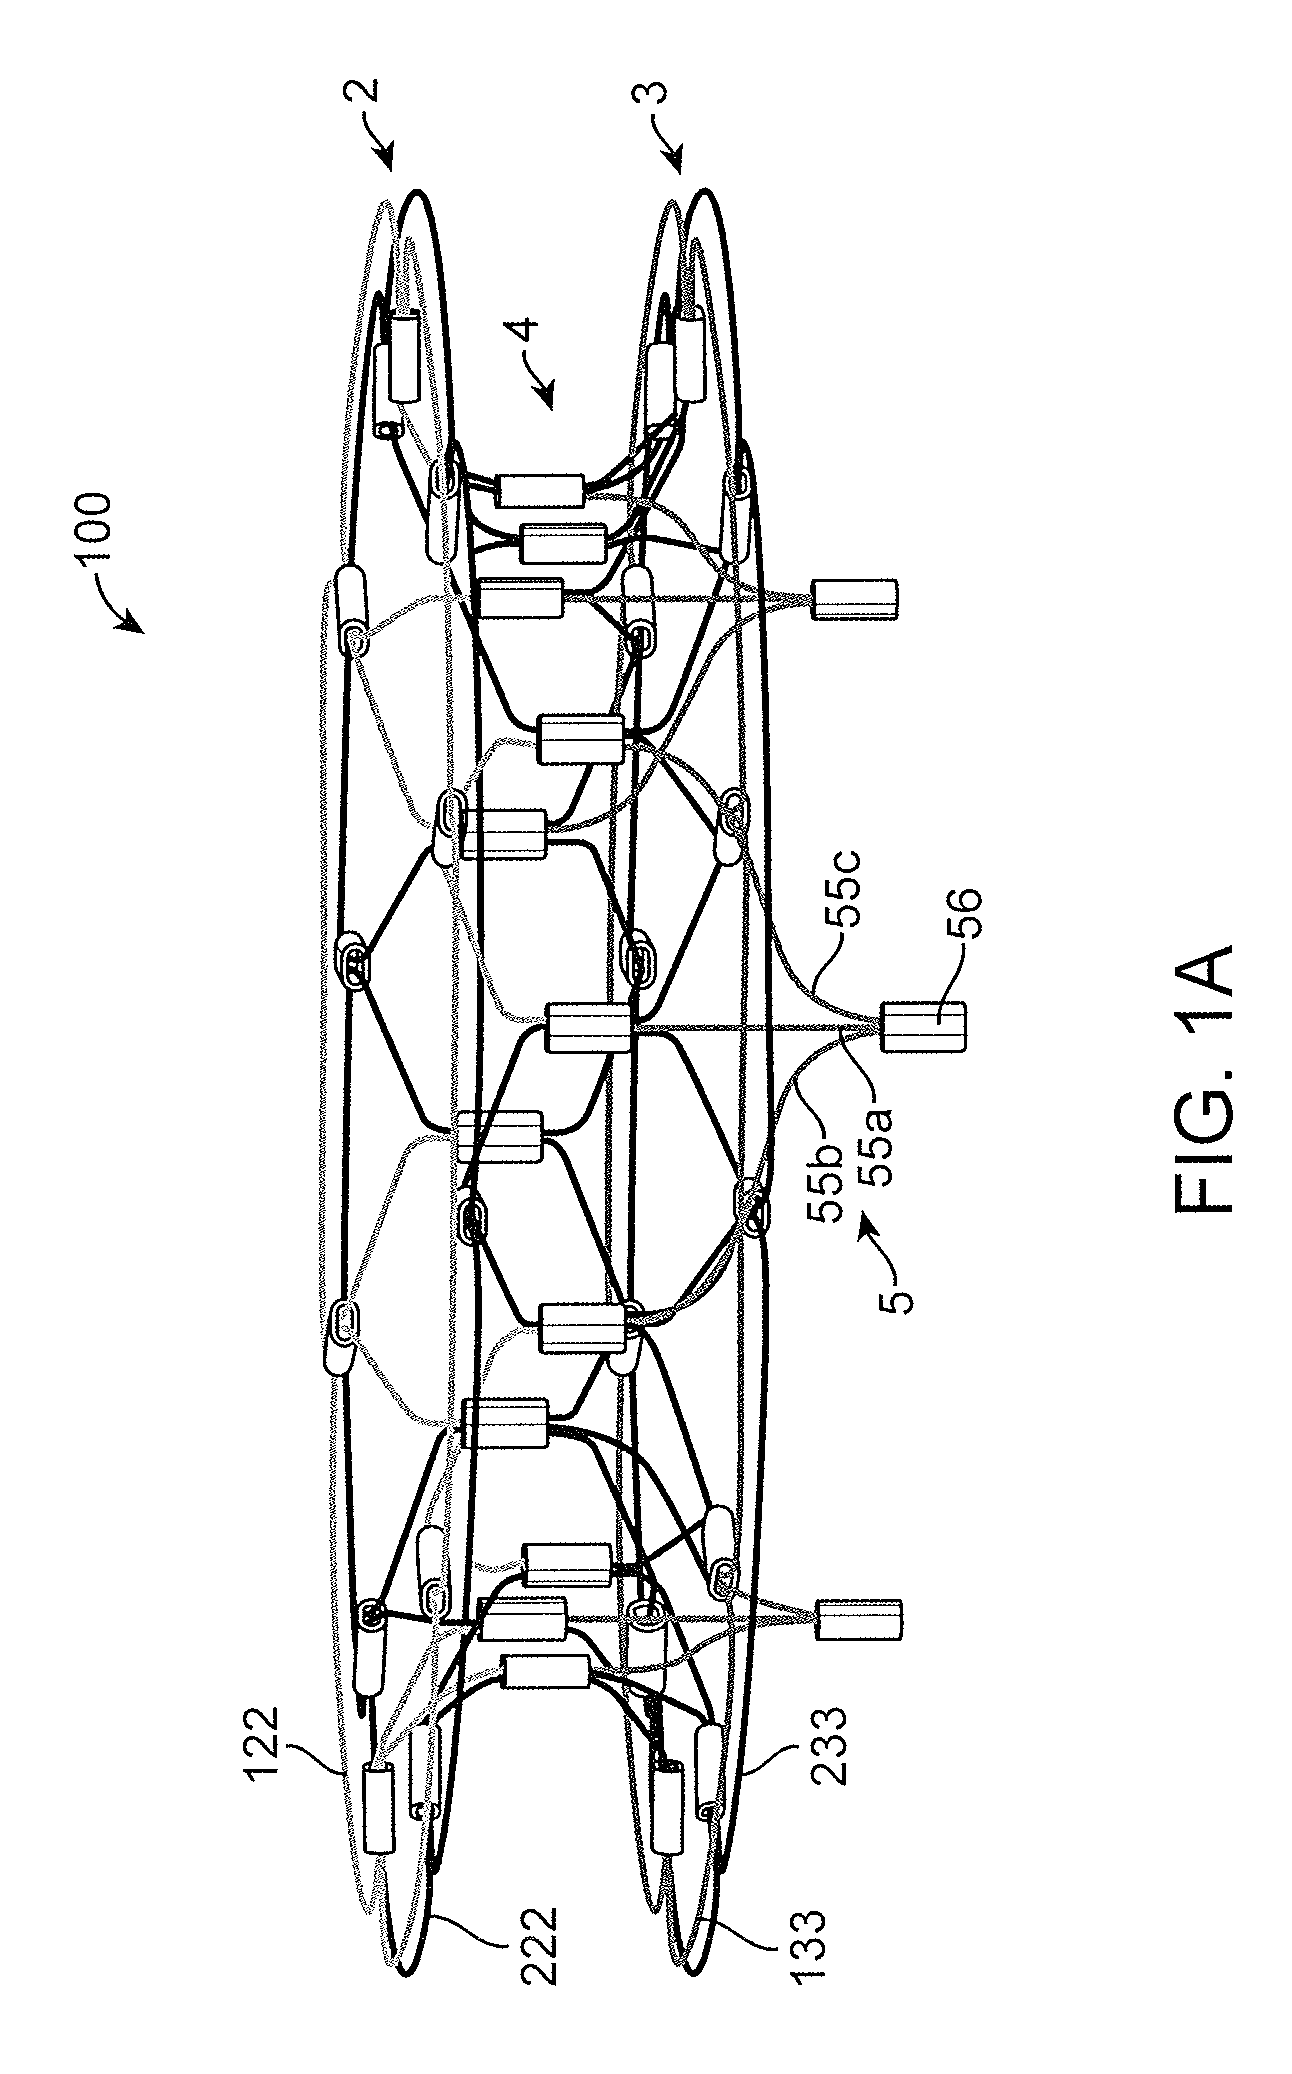 System and method for cardiac valve repair and replacement